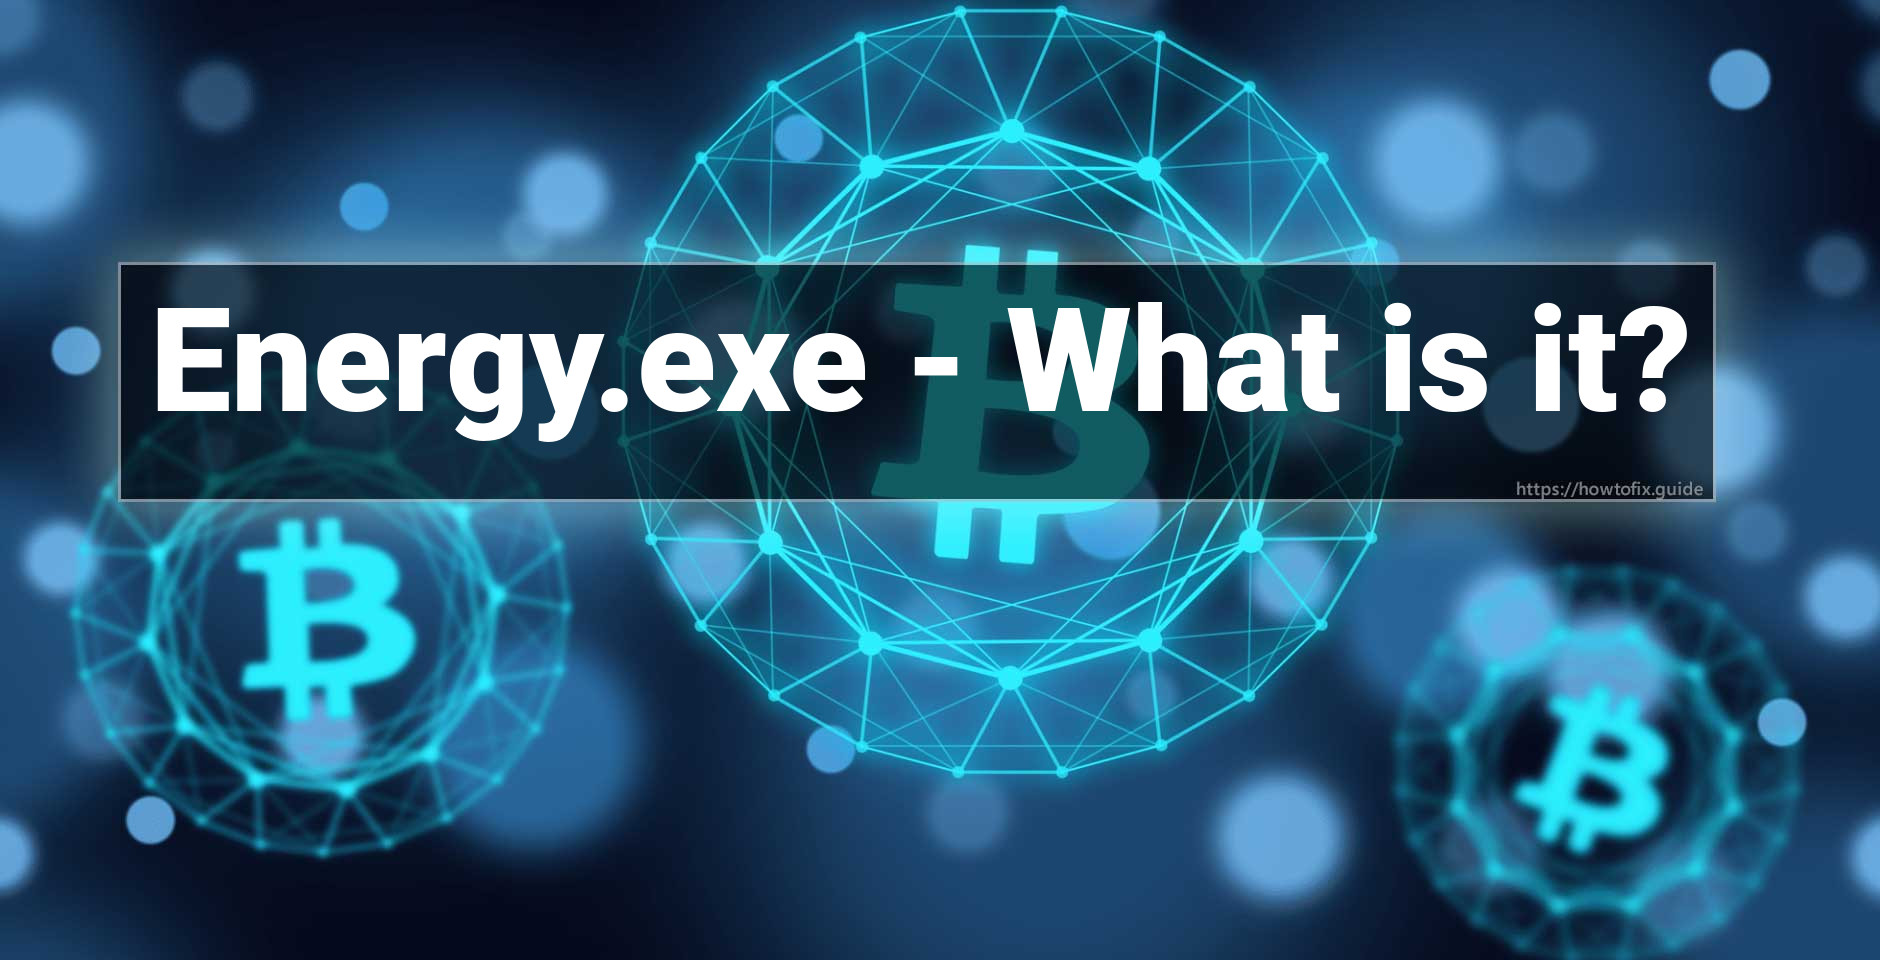 Identify energy.exe alternatives
Research and gather information on alternative programs that can perform similar functions to energy.exe